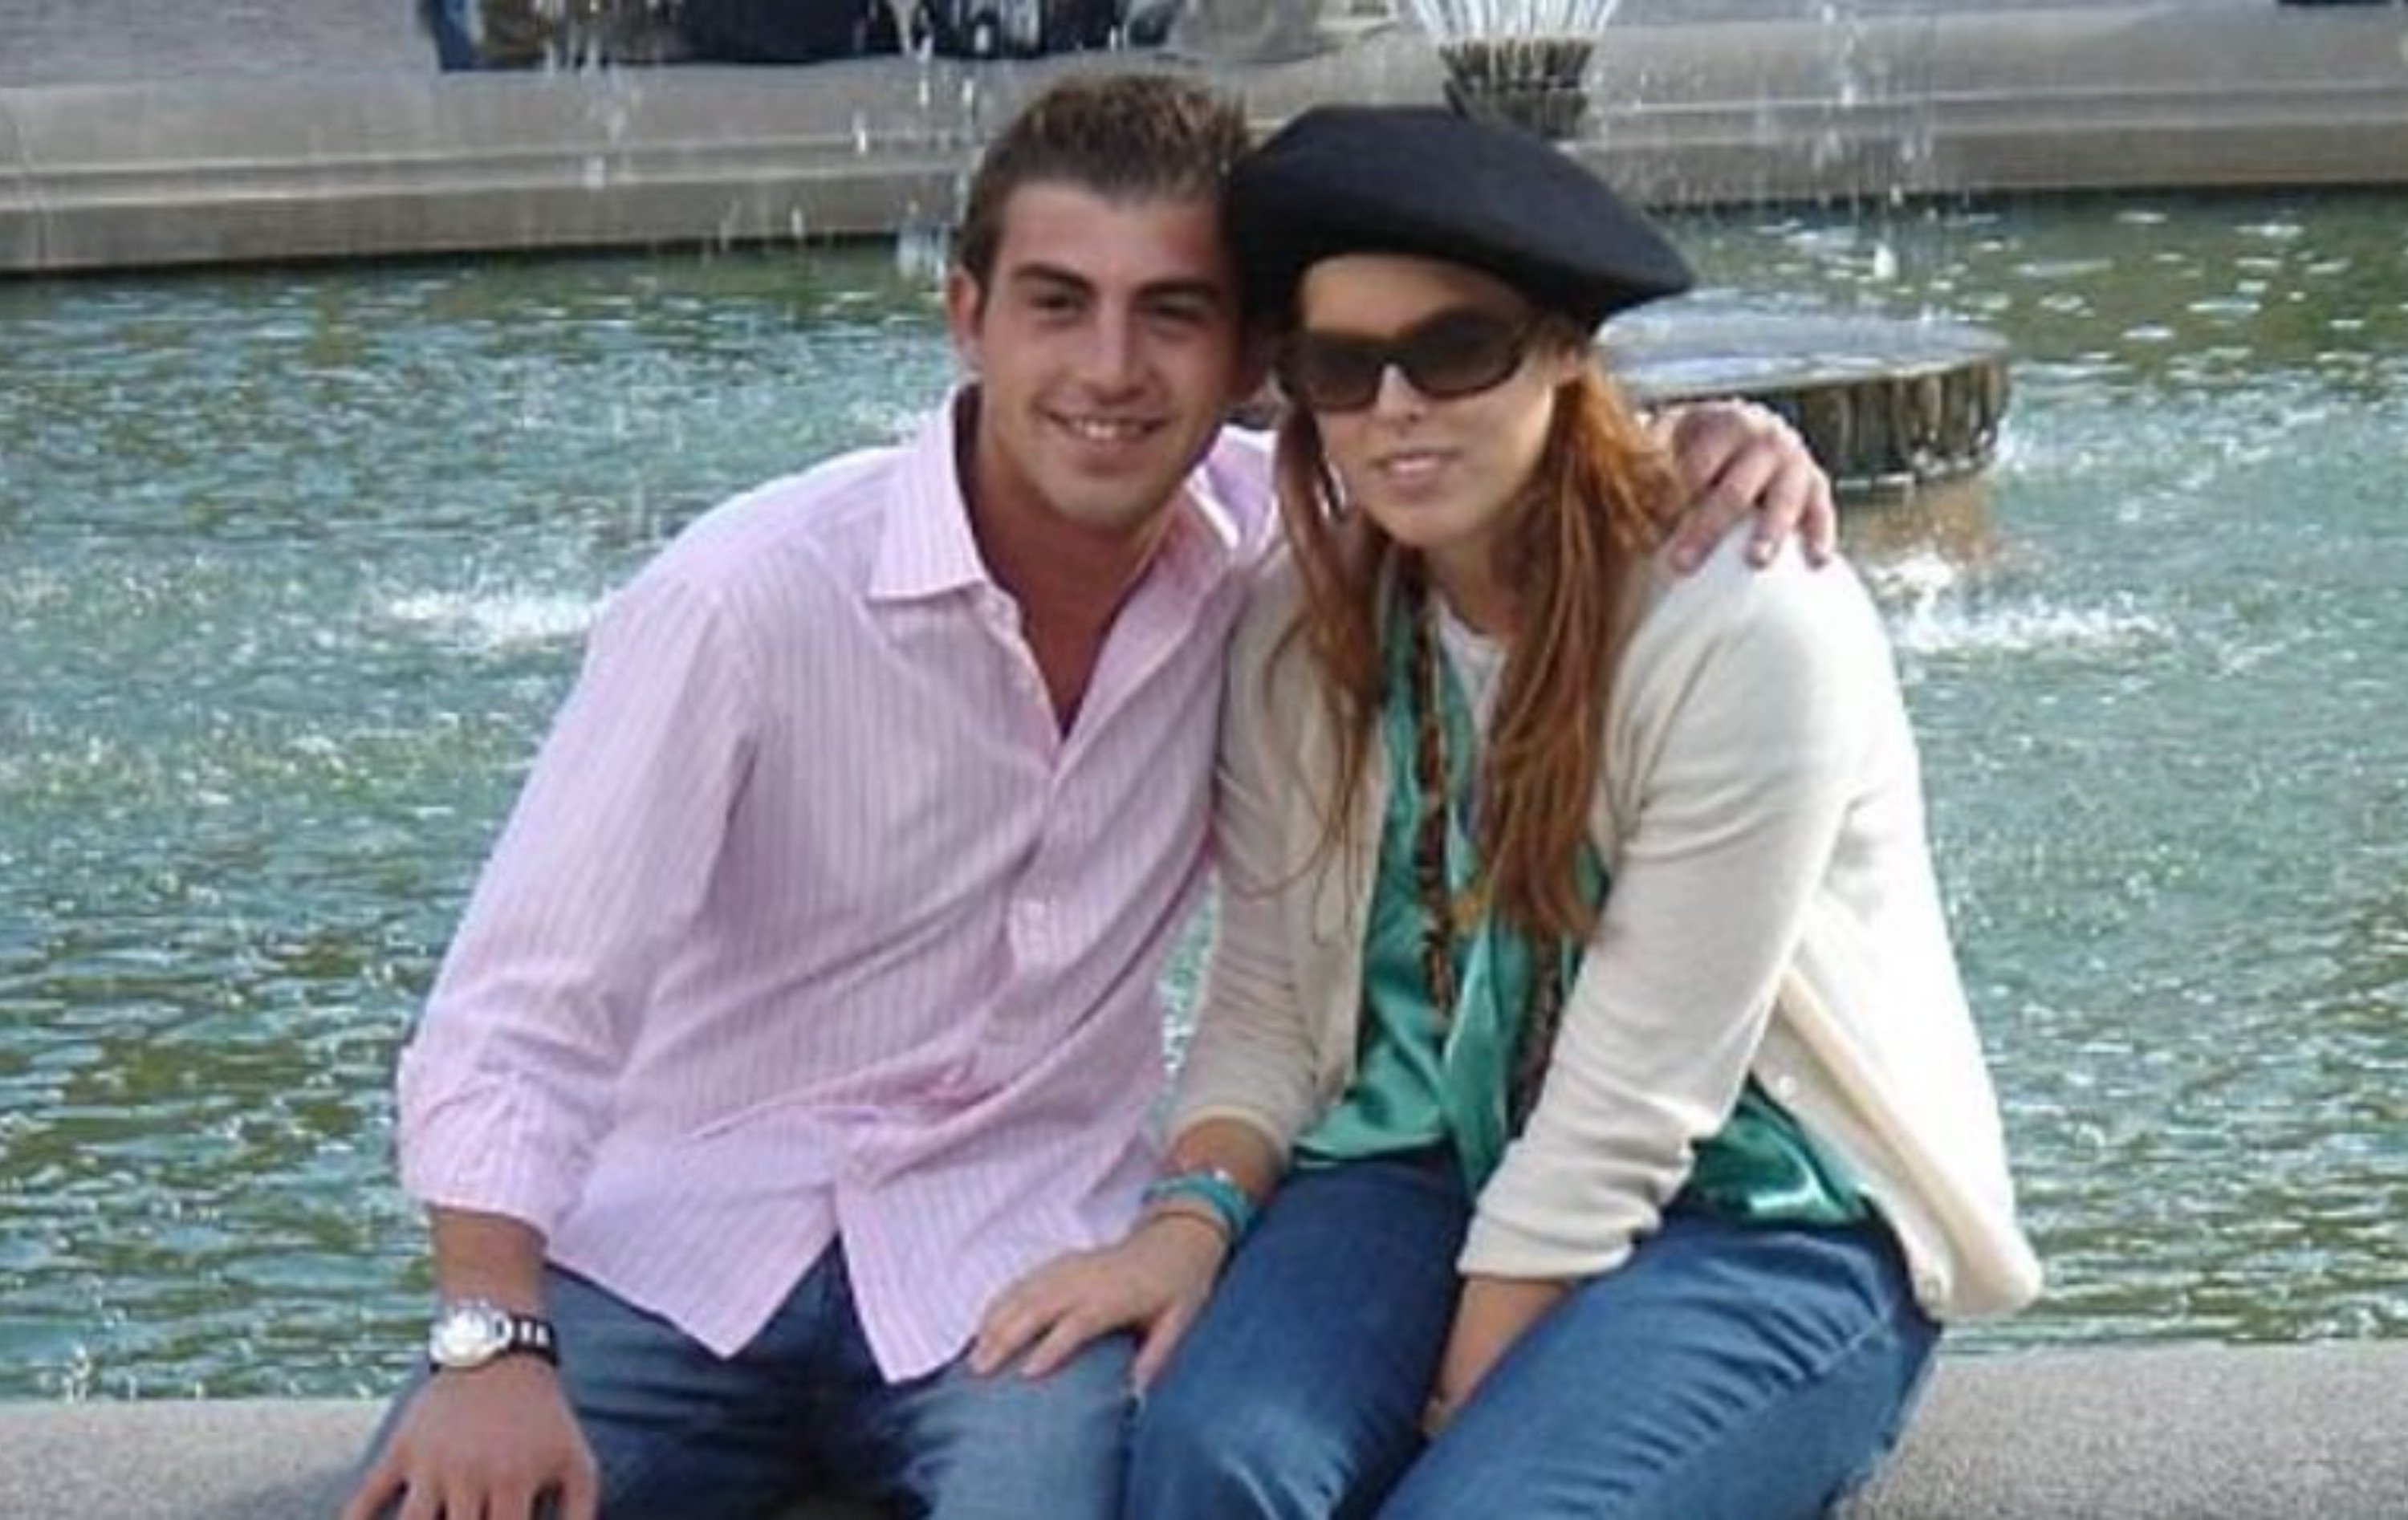 Princess Beatrice and Paolo Liuzzo dated in 2005. Photo: @chiIIum/X 